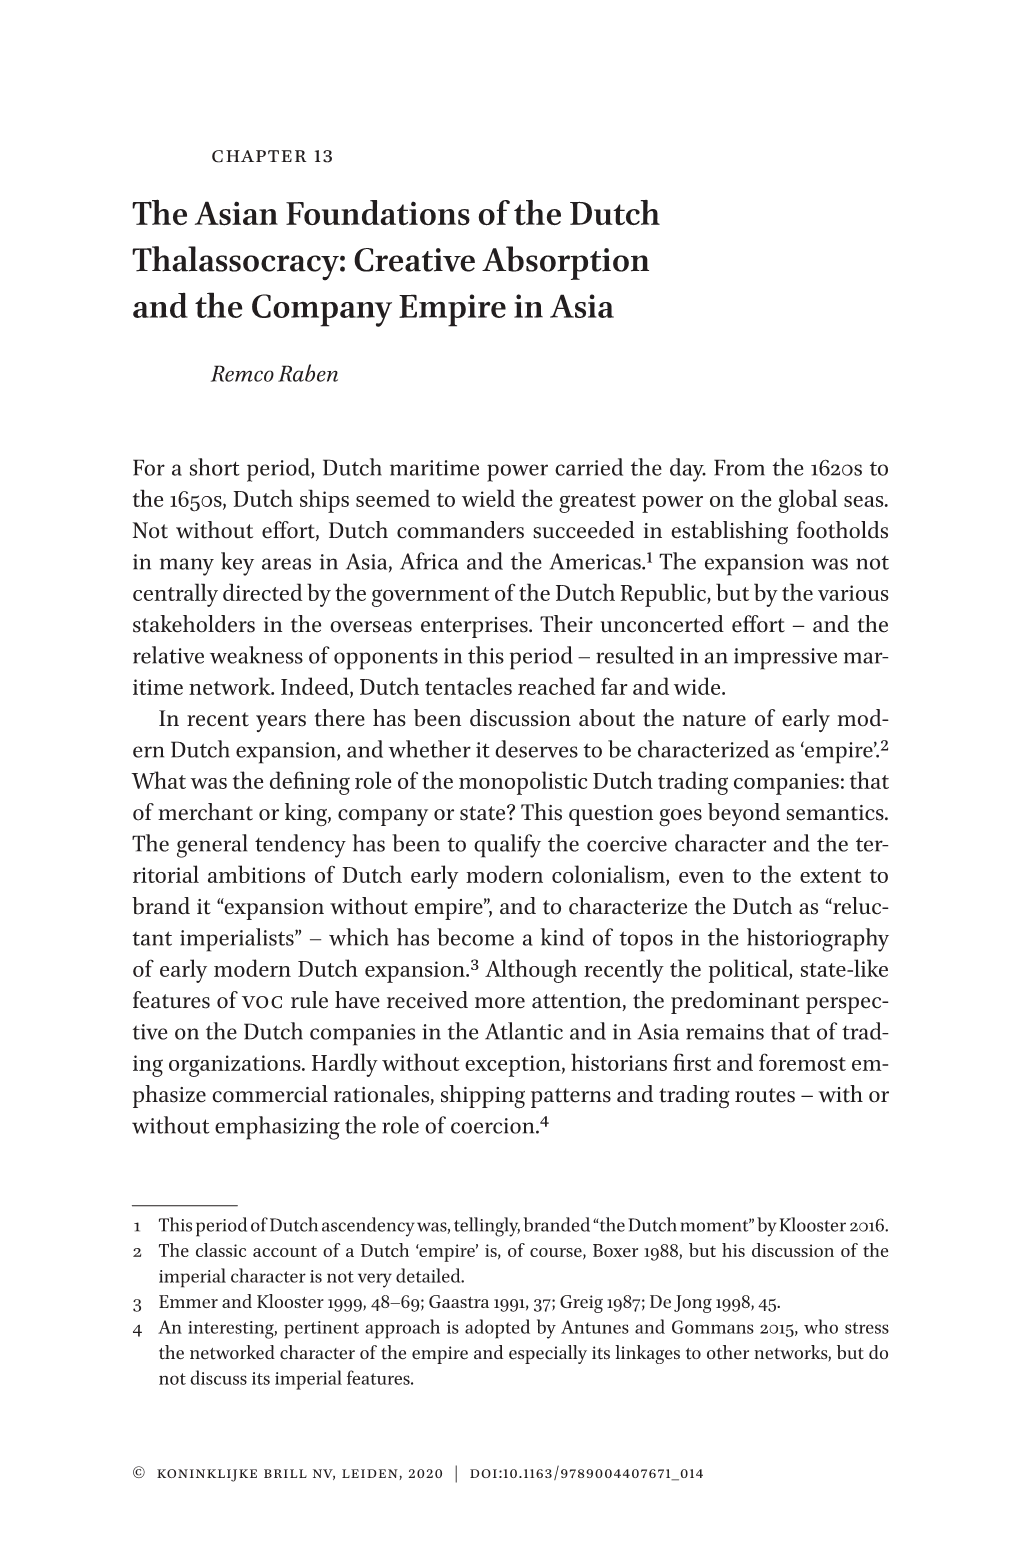 The Asian Foundations of the Dutch Thalassocracy: Creative Absorption and the Company Empire in Asia